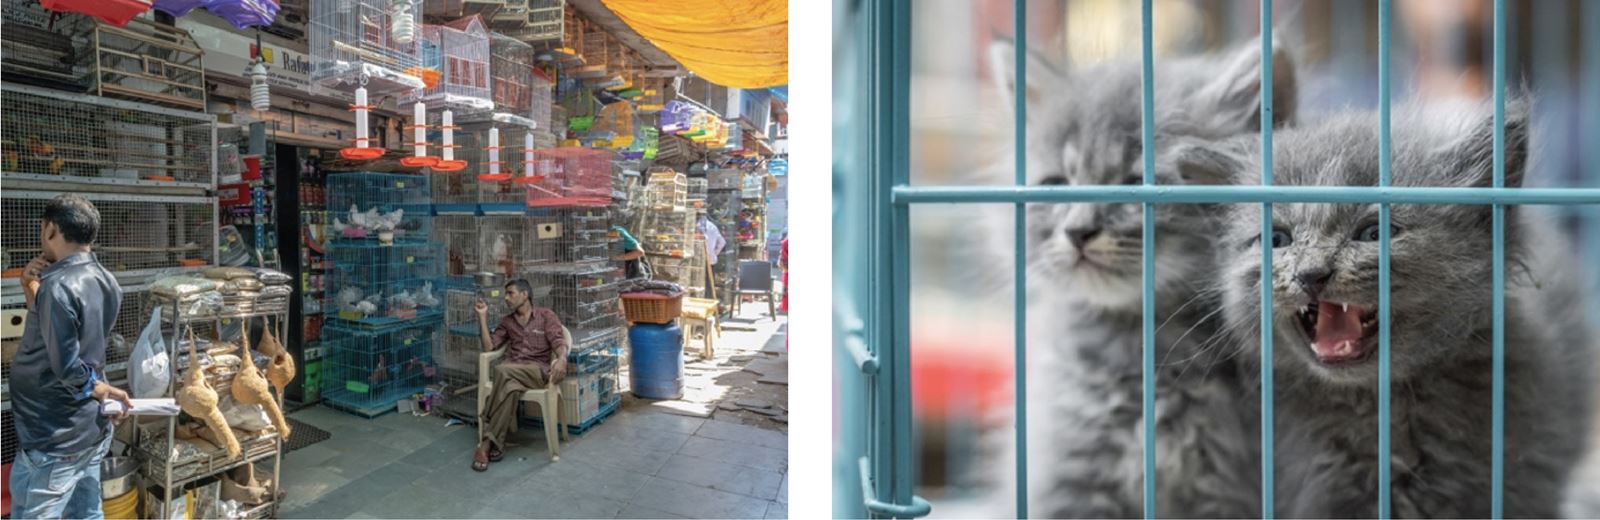 Display of any animals outside pet shops and housing puppies and kittens in wire mesh cages is against the law